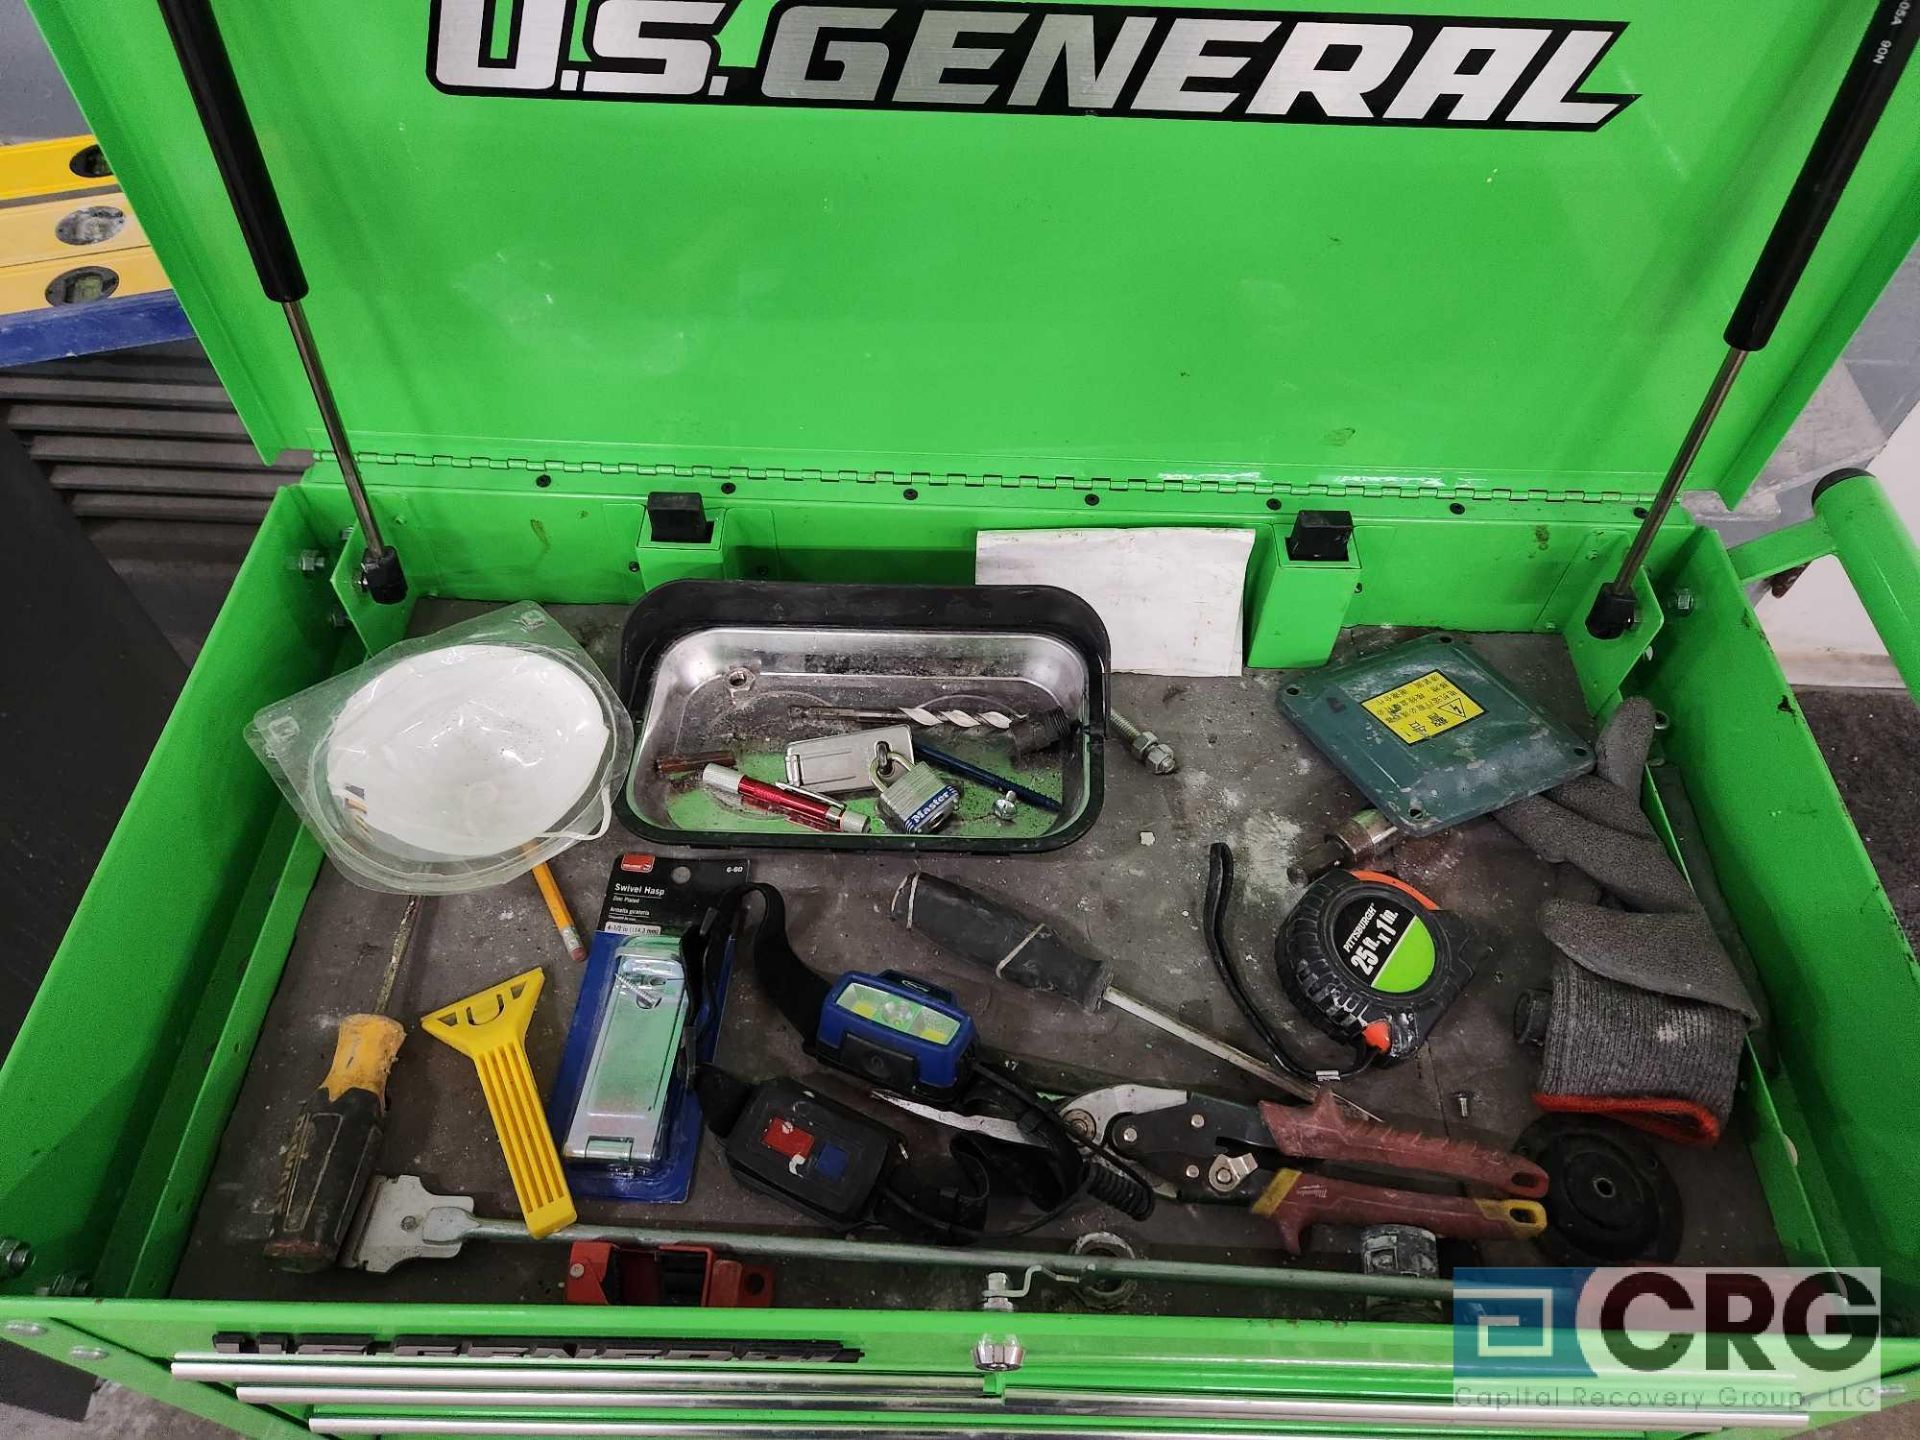 U.S. General 5-Compartment Portable Tool Box - Image 2 of 4